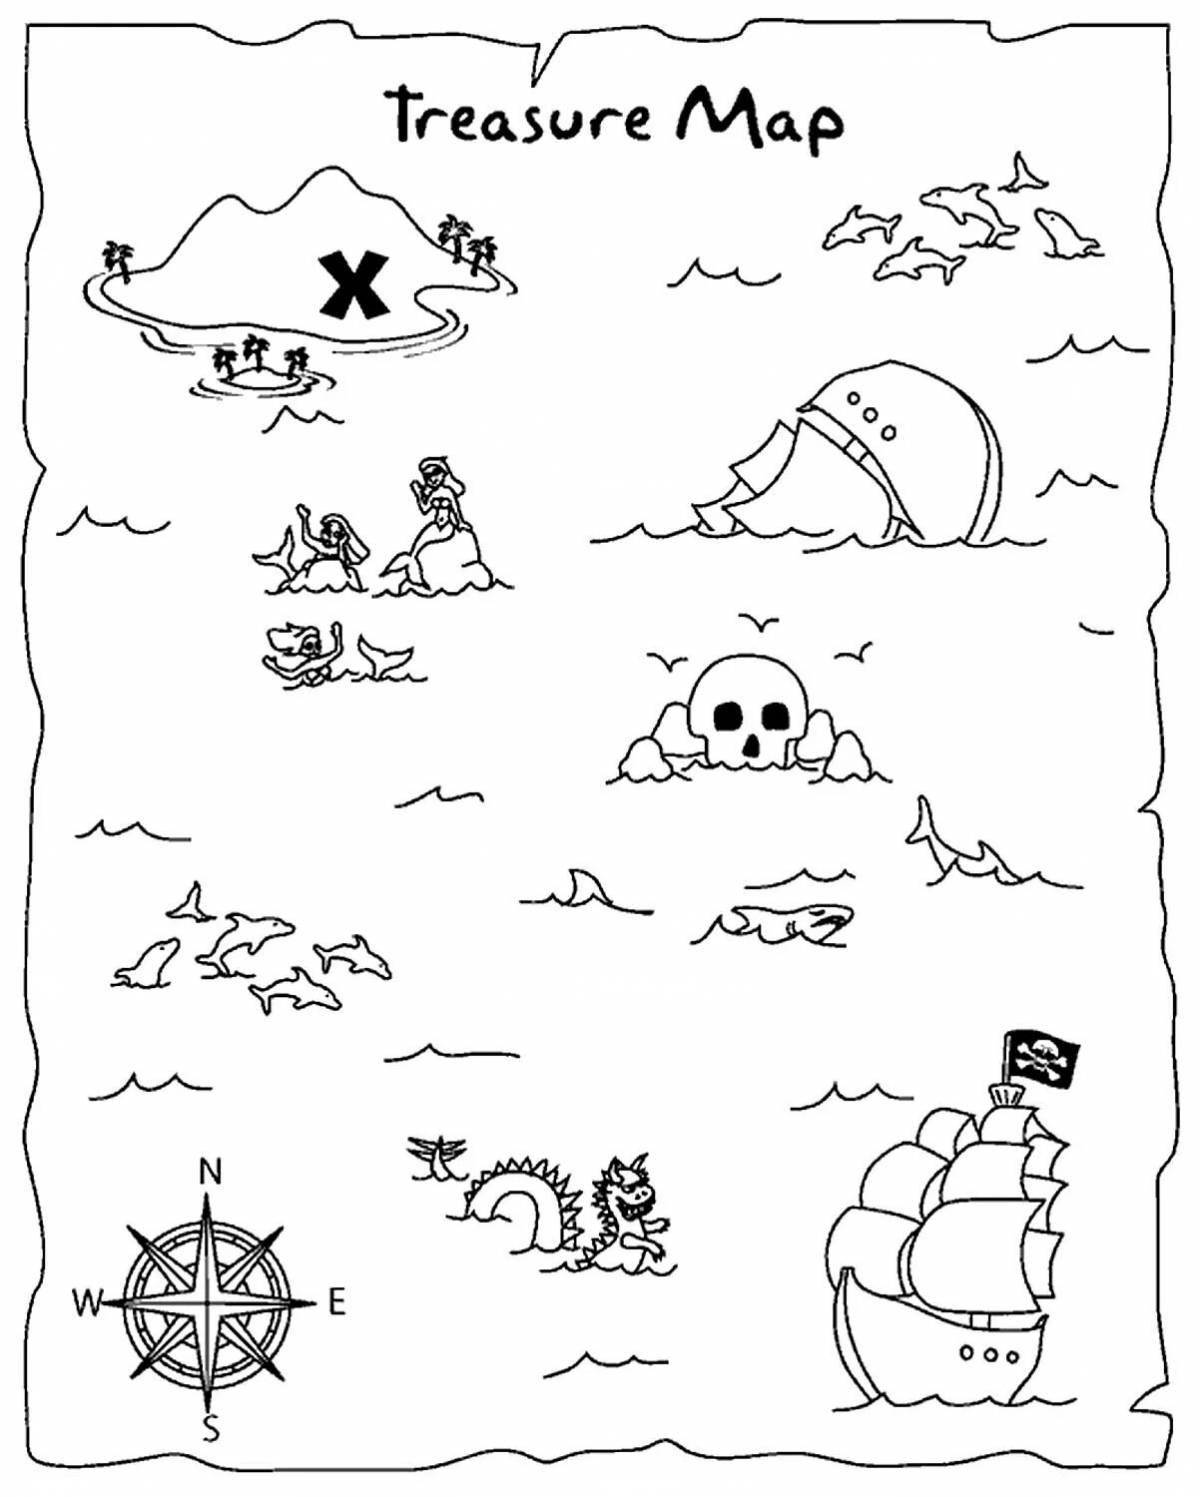 Exquisite pirate treasure map coloring page